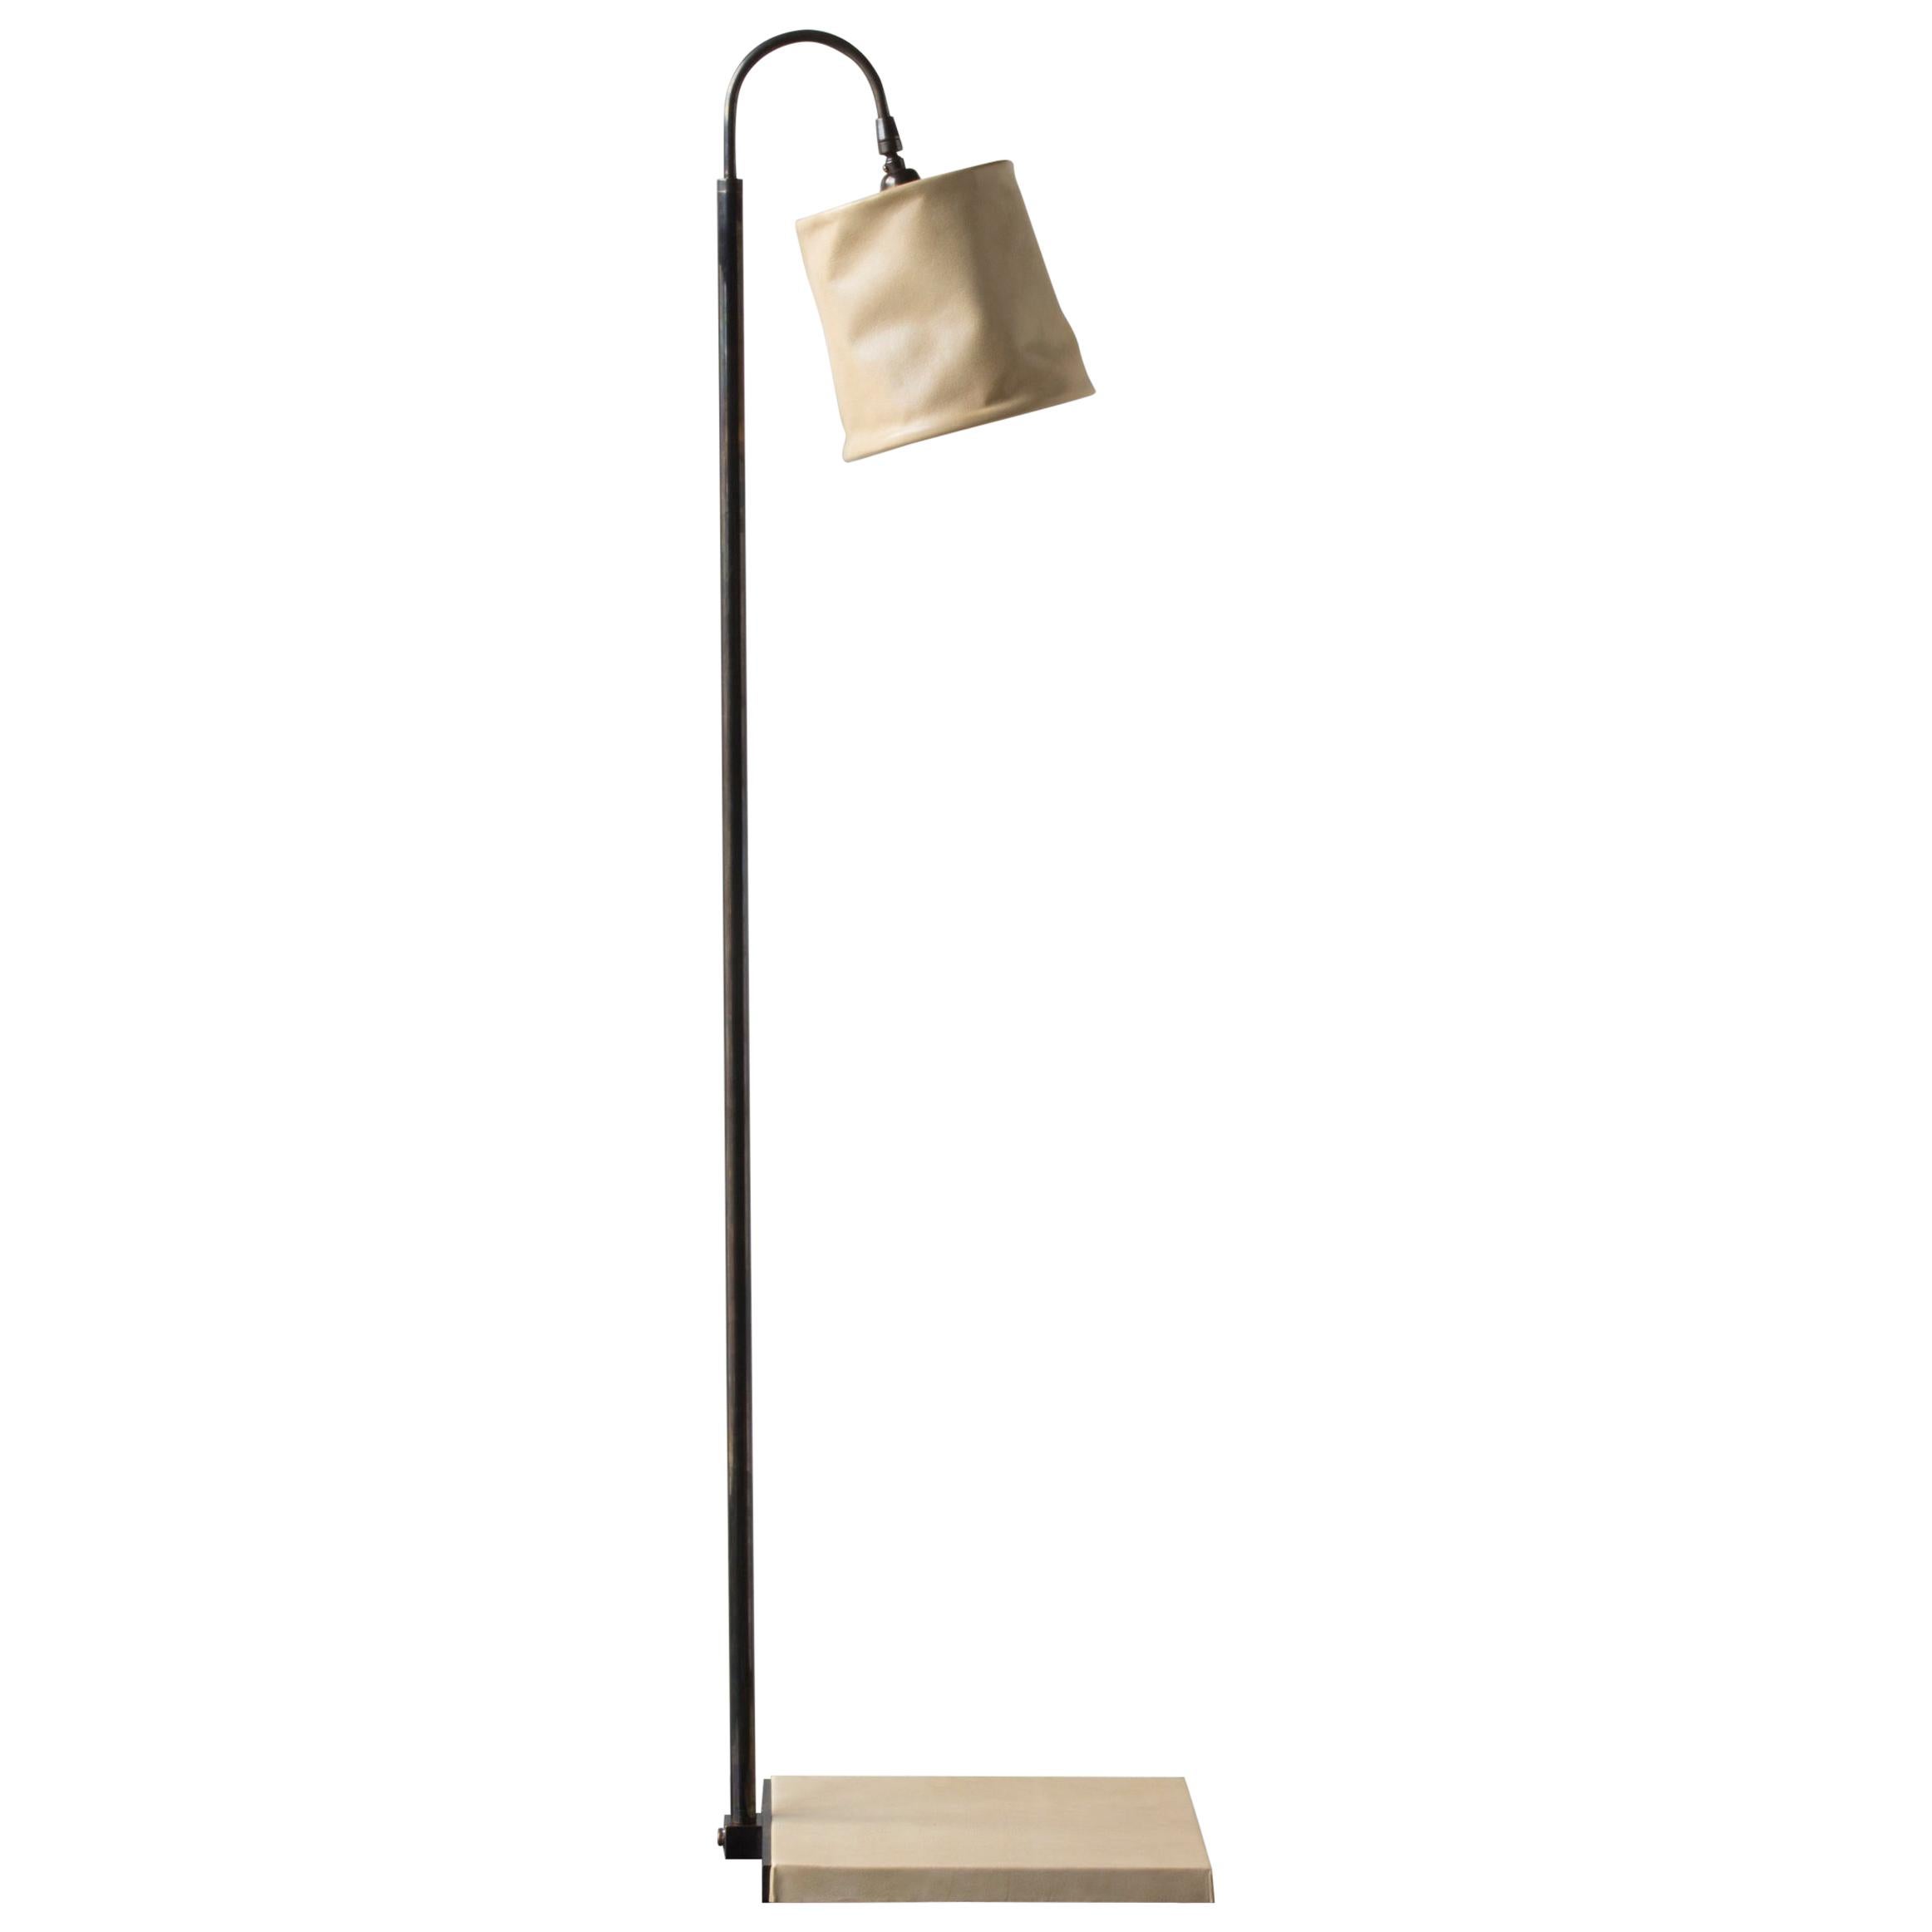 Series01 Floor Lamp, Hand-Dyed Putty Tan Leather, Dark Patinated Brass For Sale